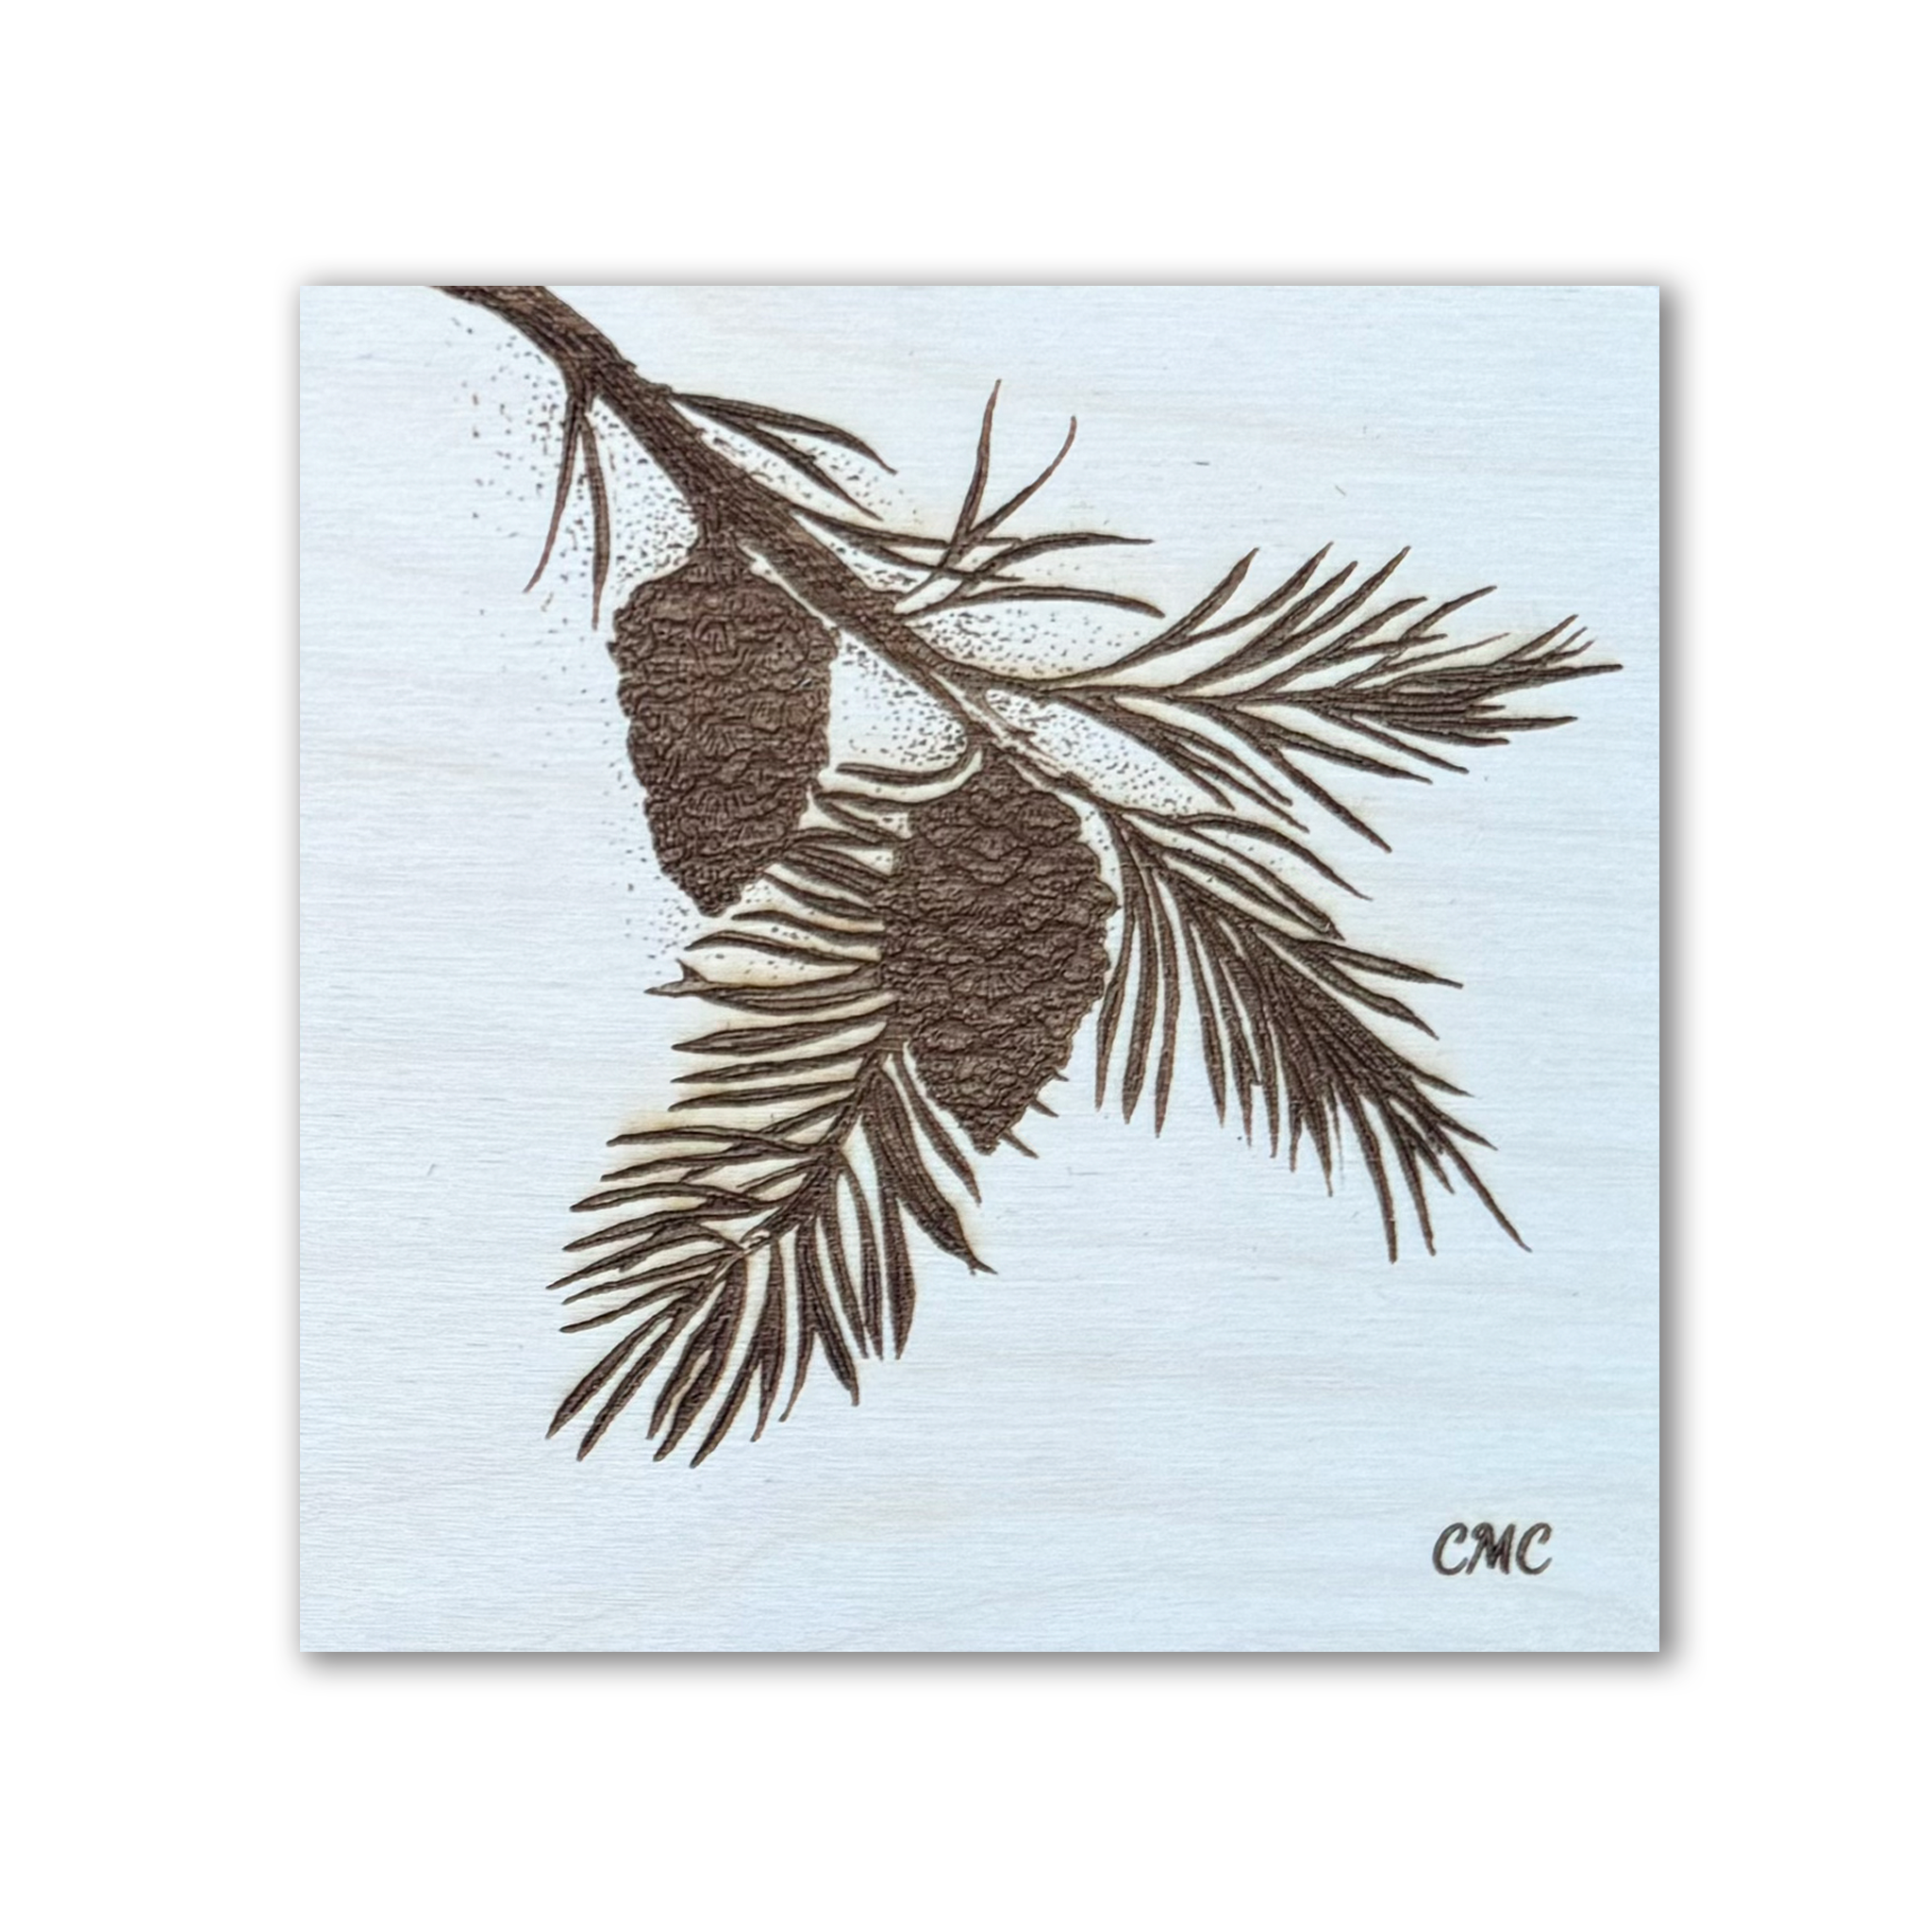  Hand crafted Laser engraved pine bough on natural baltic birch tile